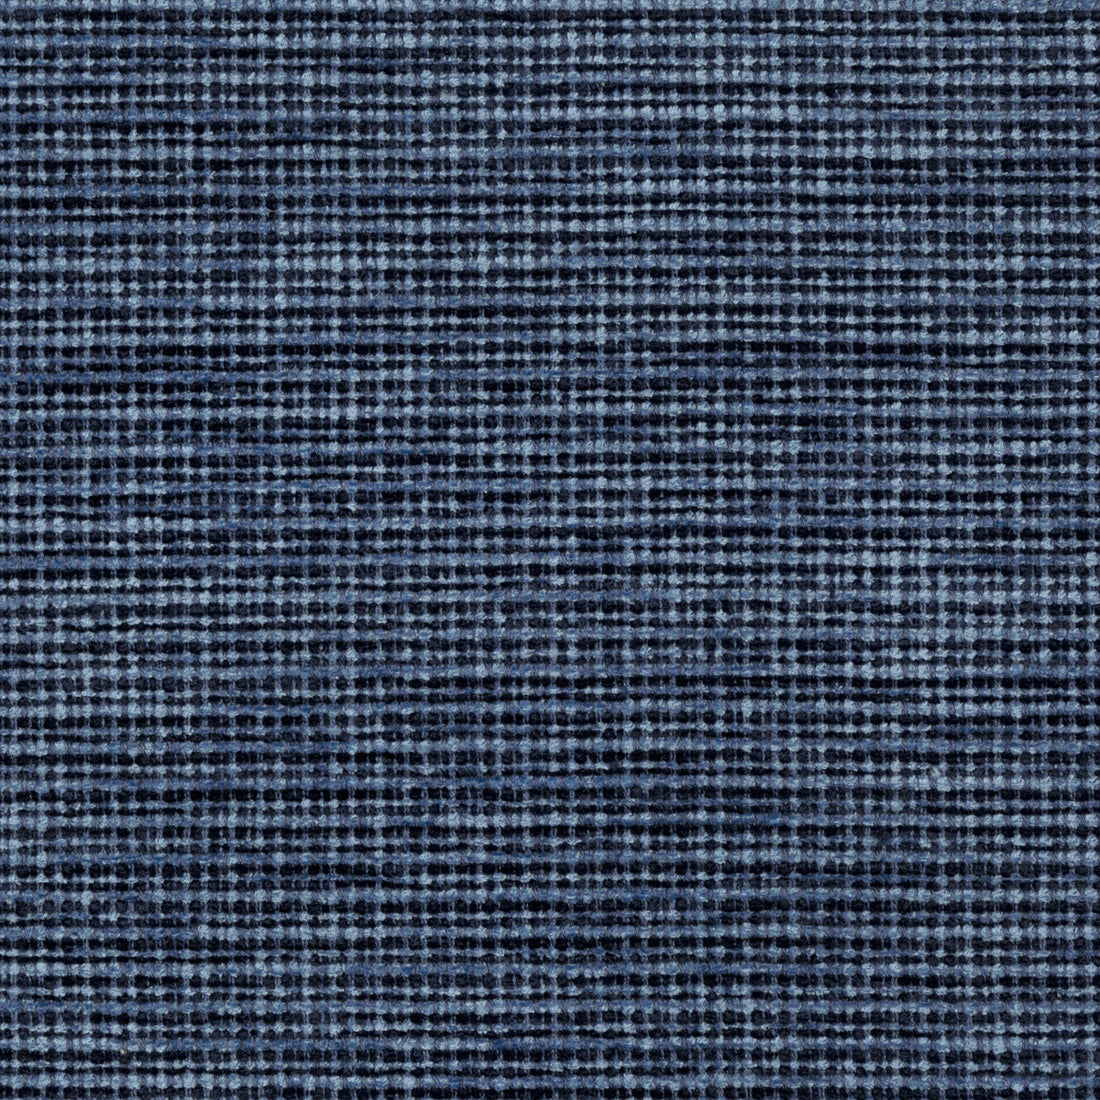 Freney Texture fabric in blue color - pattern 8019149.5.0 - by Brunschwig &amp; Fils in the Chambery Textures II collection